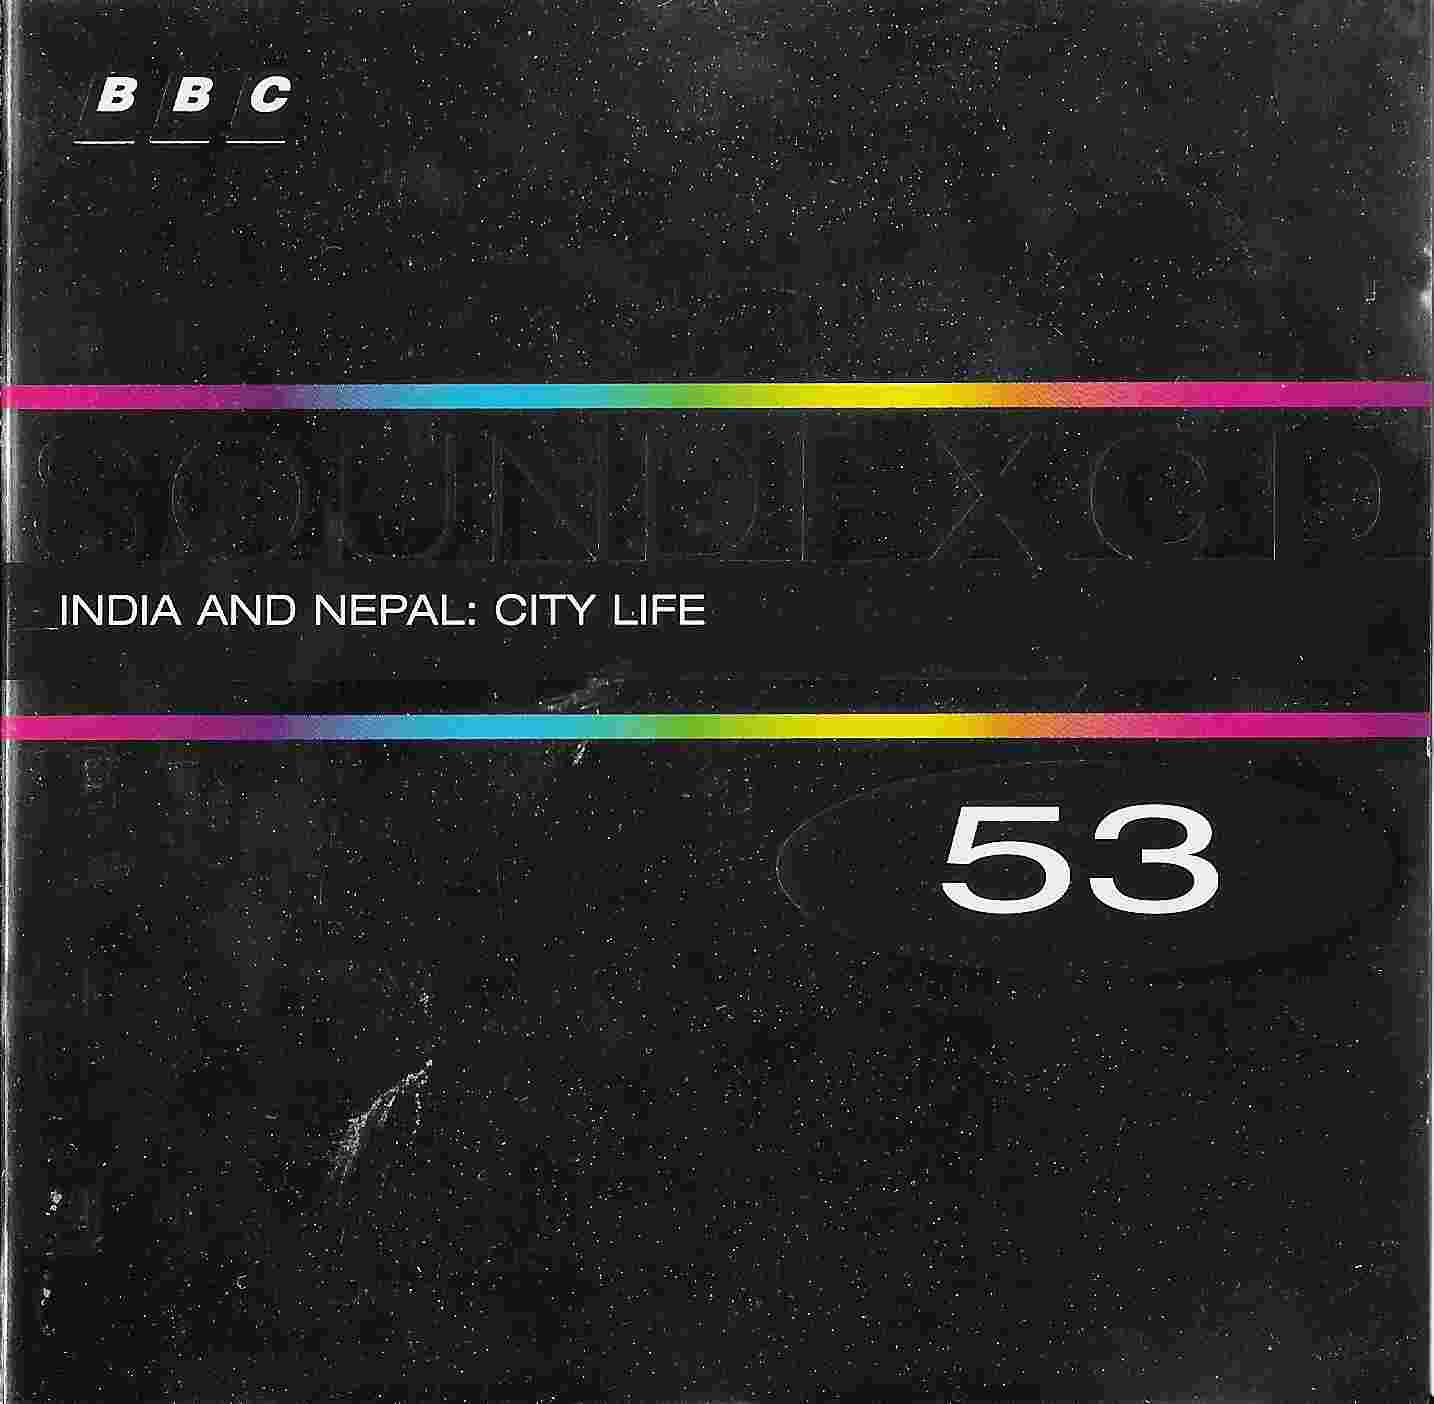 Picture of BBCCD SFX053 India and Nepal: City life by artist Various from the BBC records and Tapes library